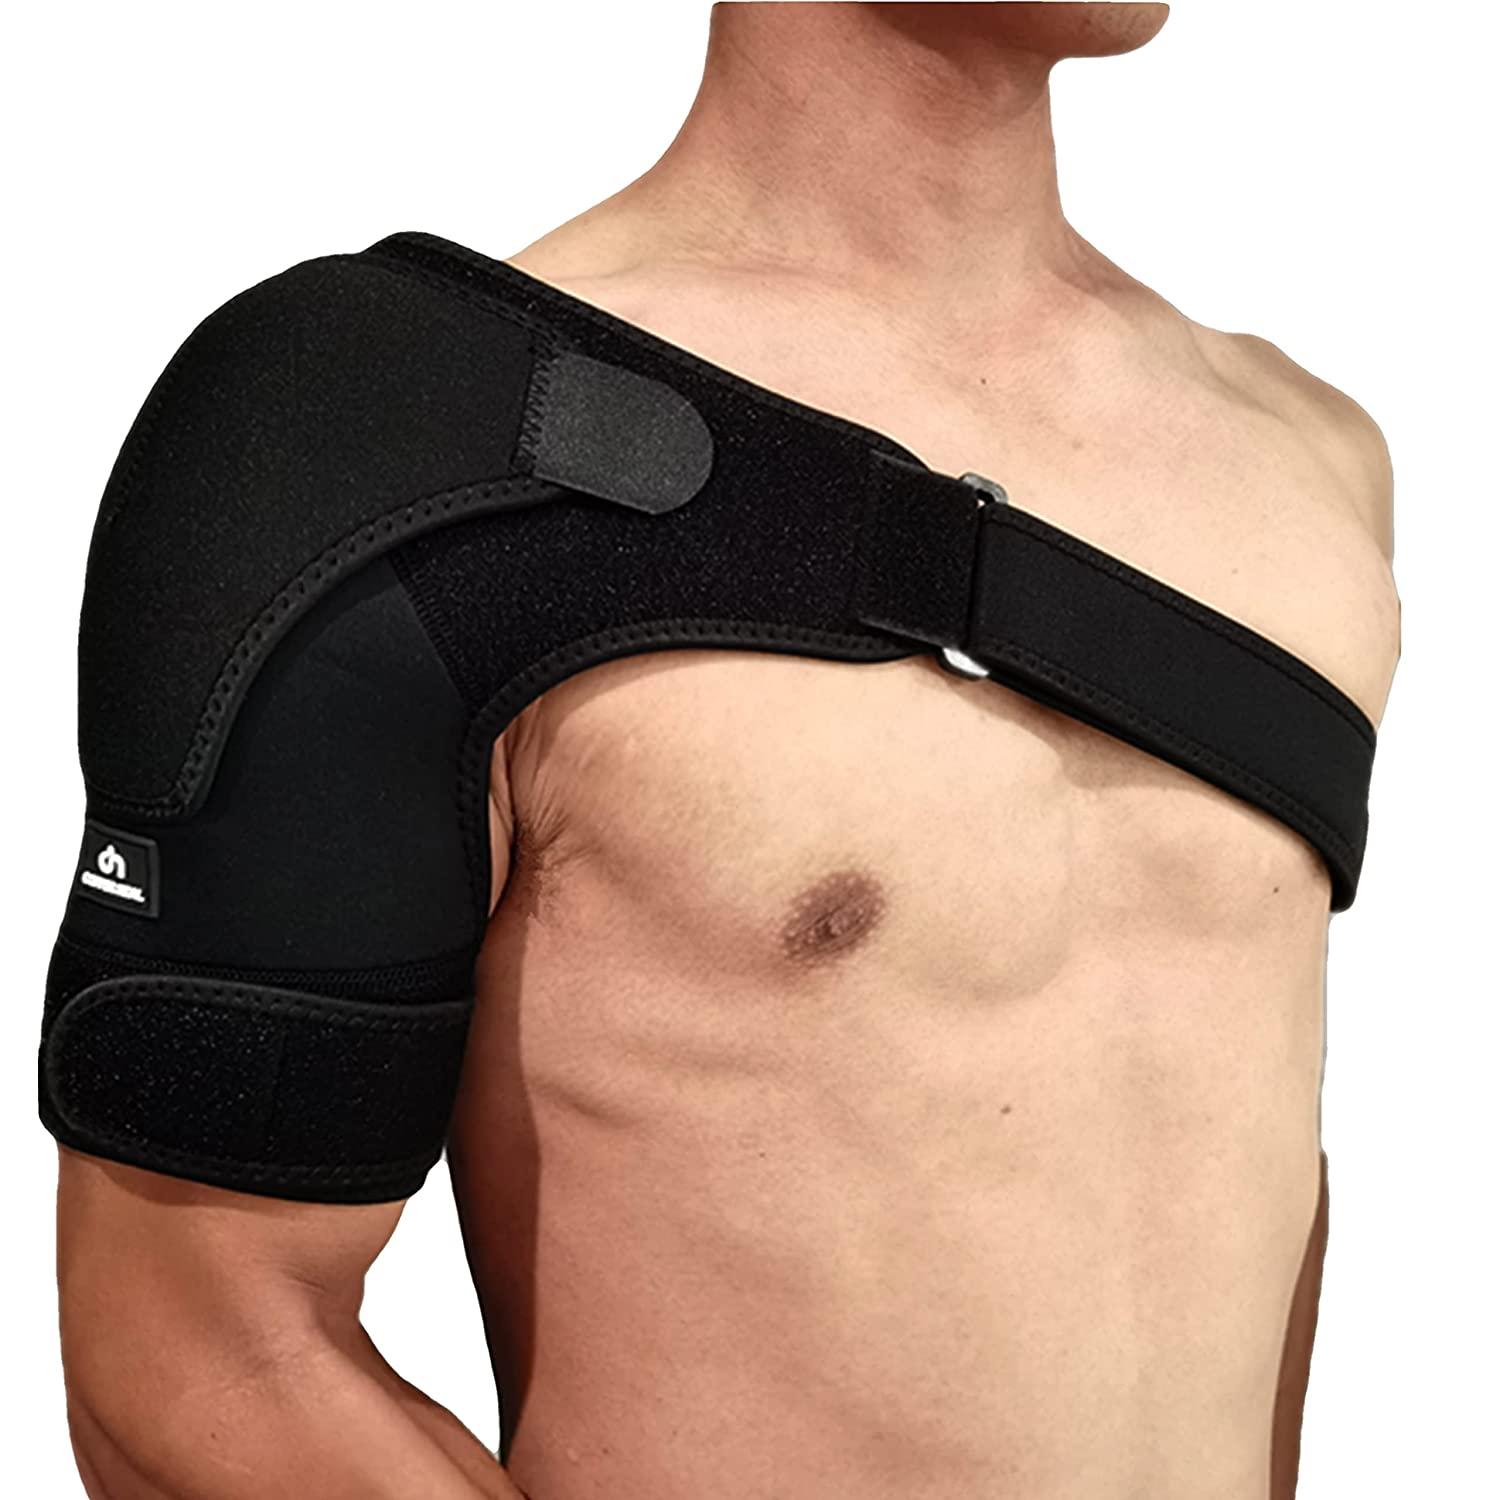 Tommie Copper Shoulder Braces in Arm support 